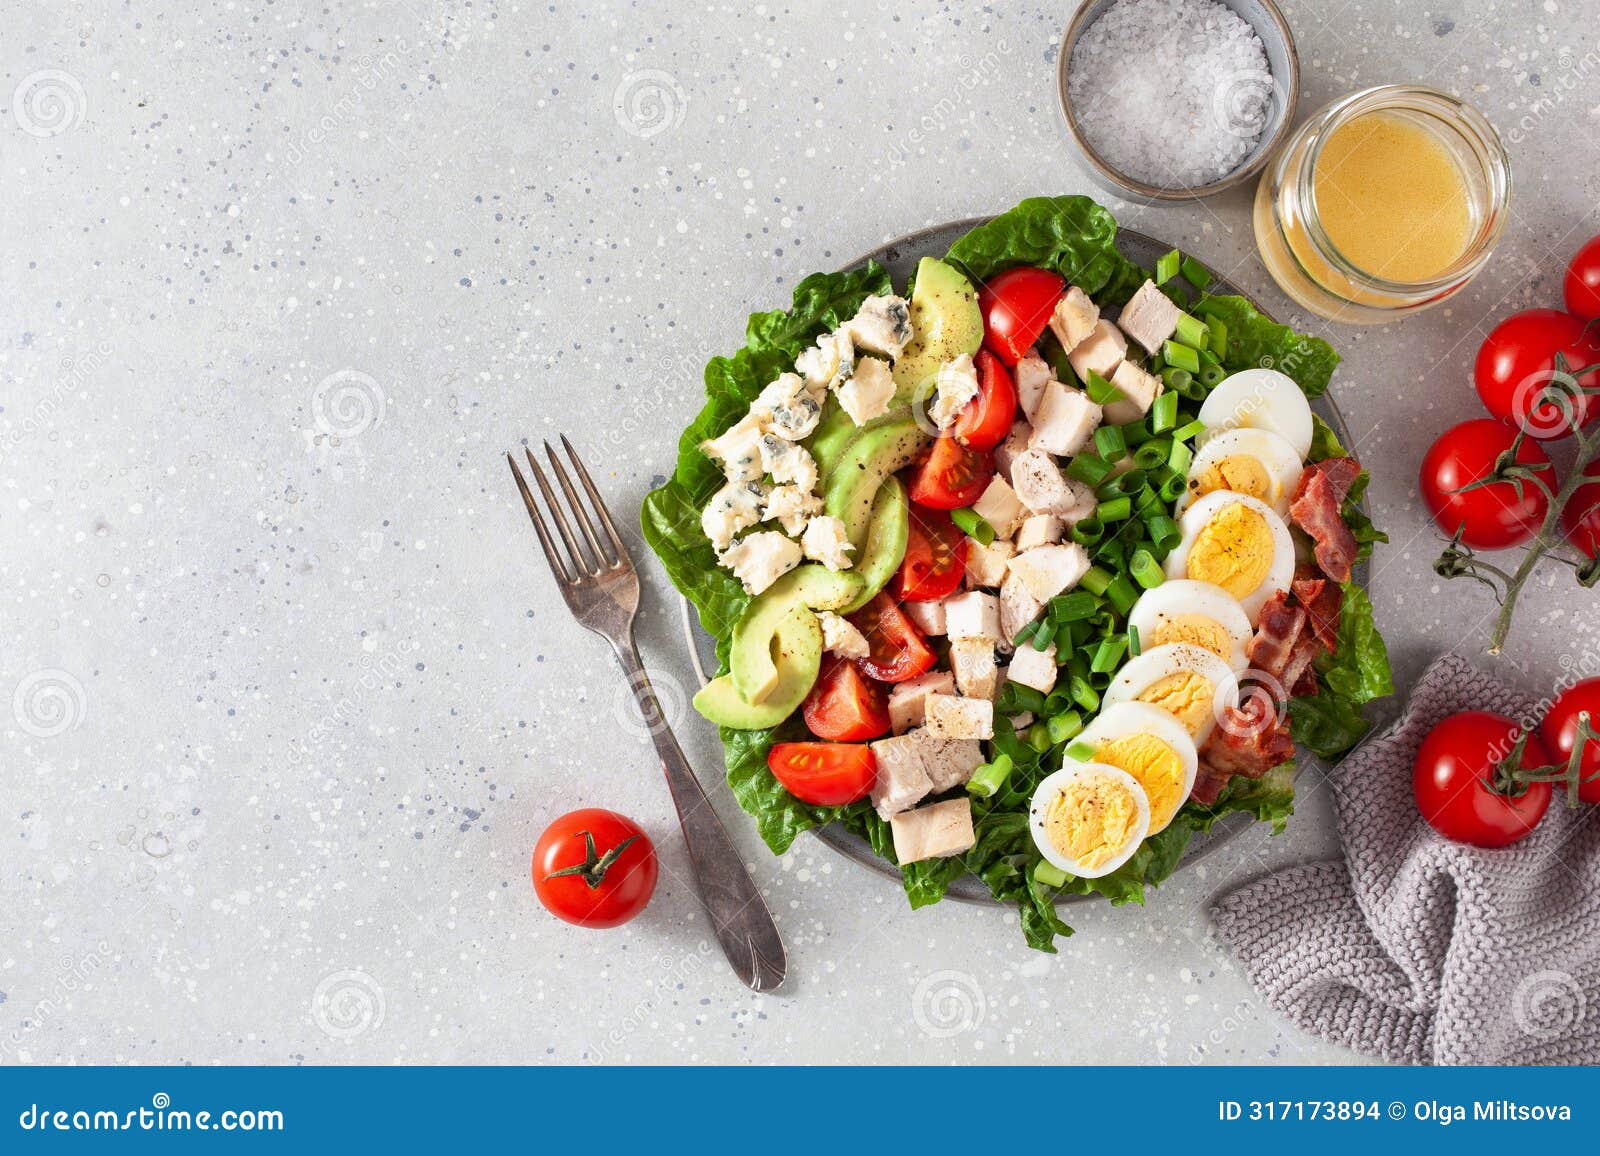 healthy american cobb salad with egg bacon avocado chicken tomato. hearty keto low carb diet